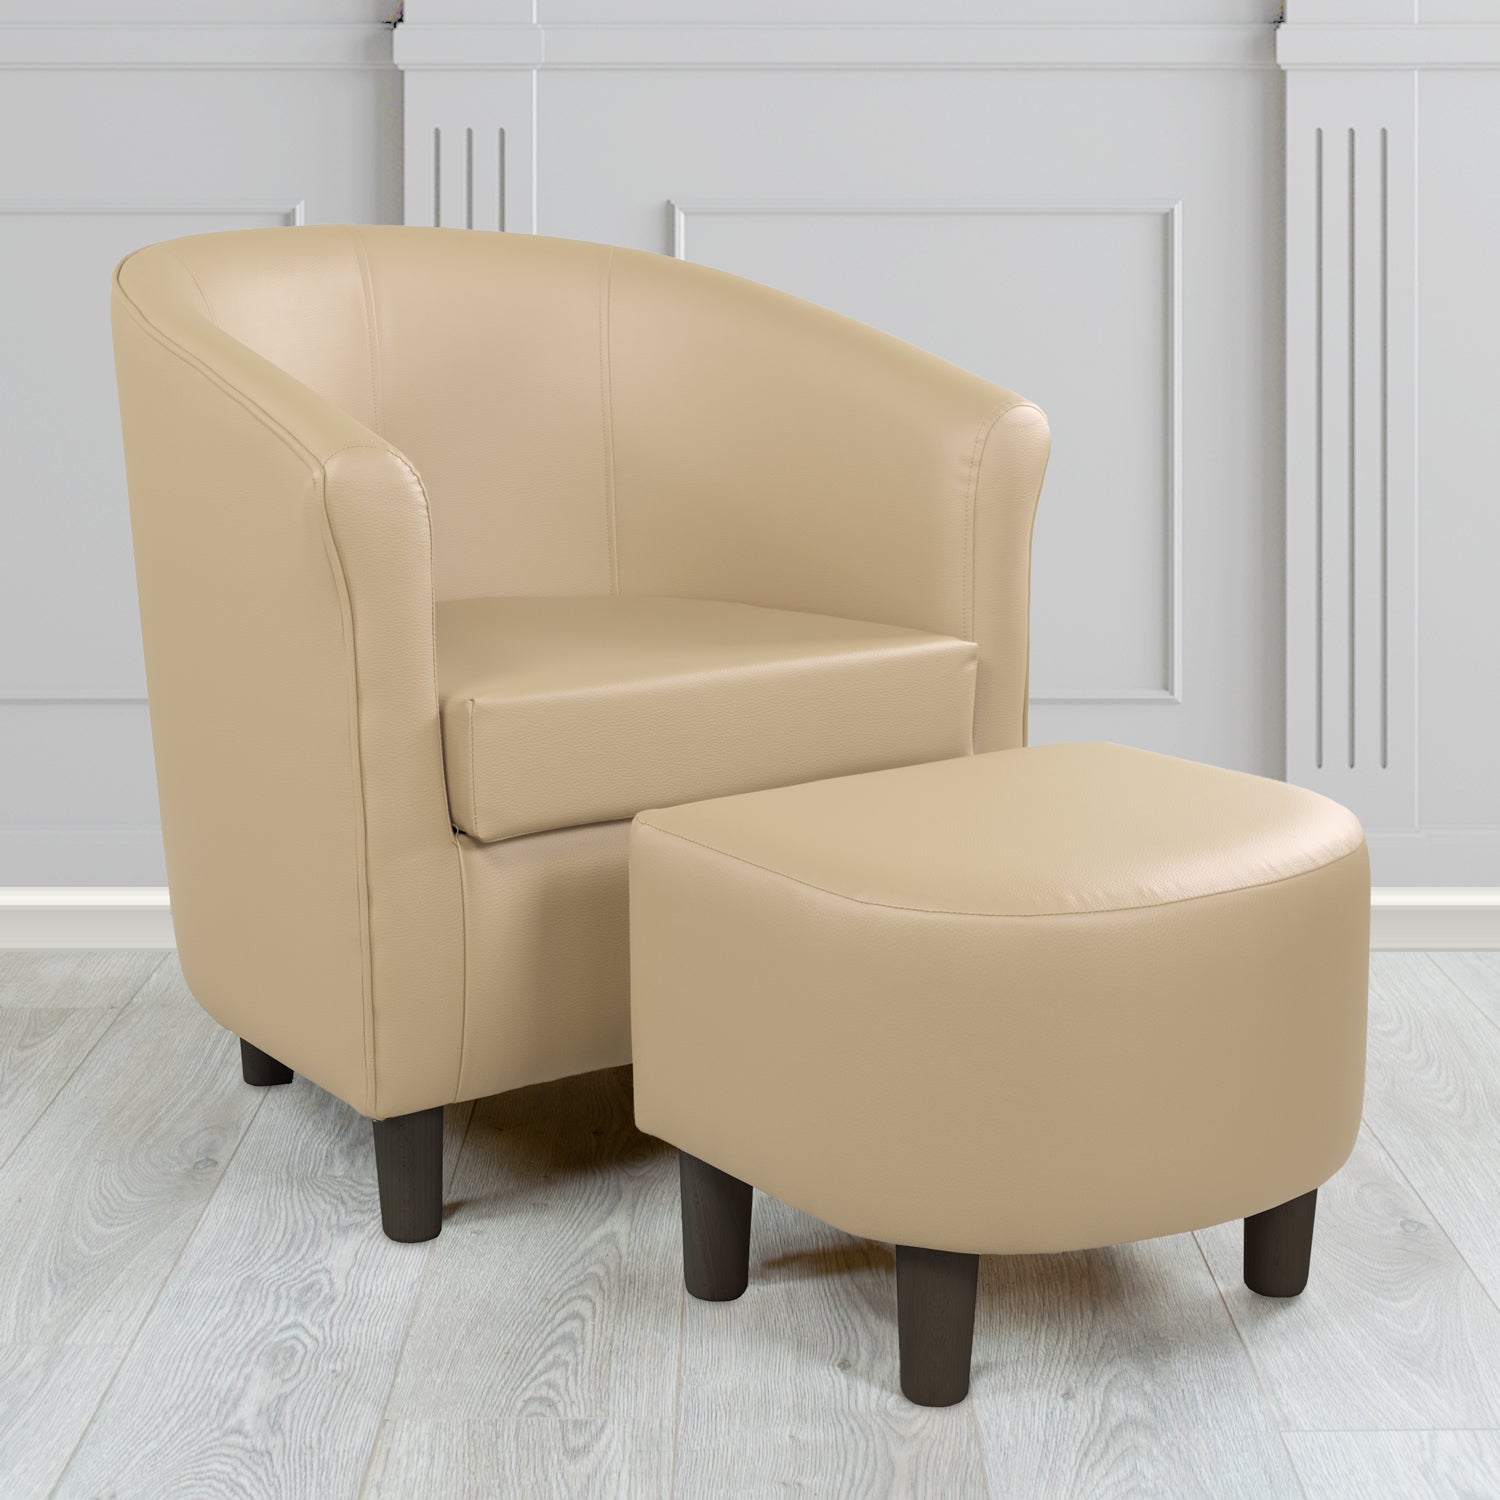 Tuscany Just Colour Almond Faux Leather Tub Chair with Dee Footstool Set - The Tub Chair Shop